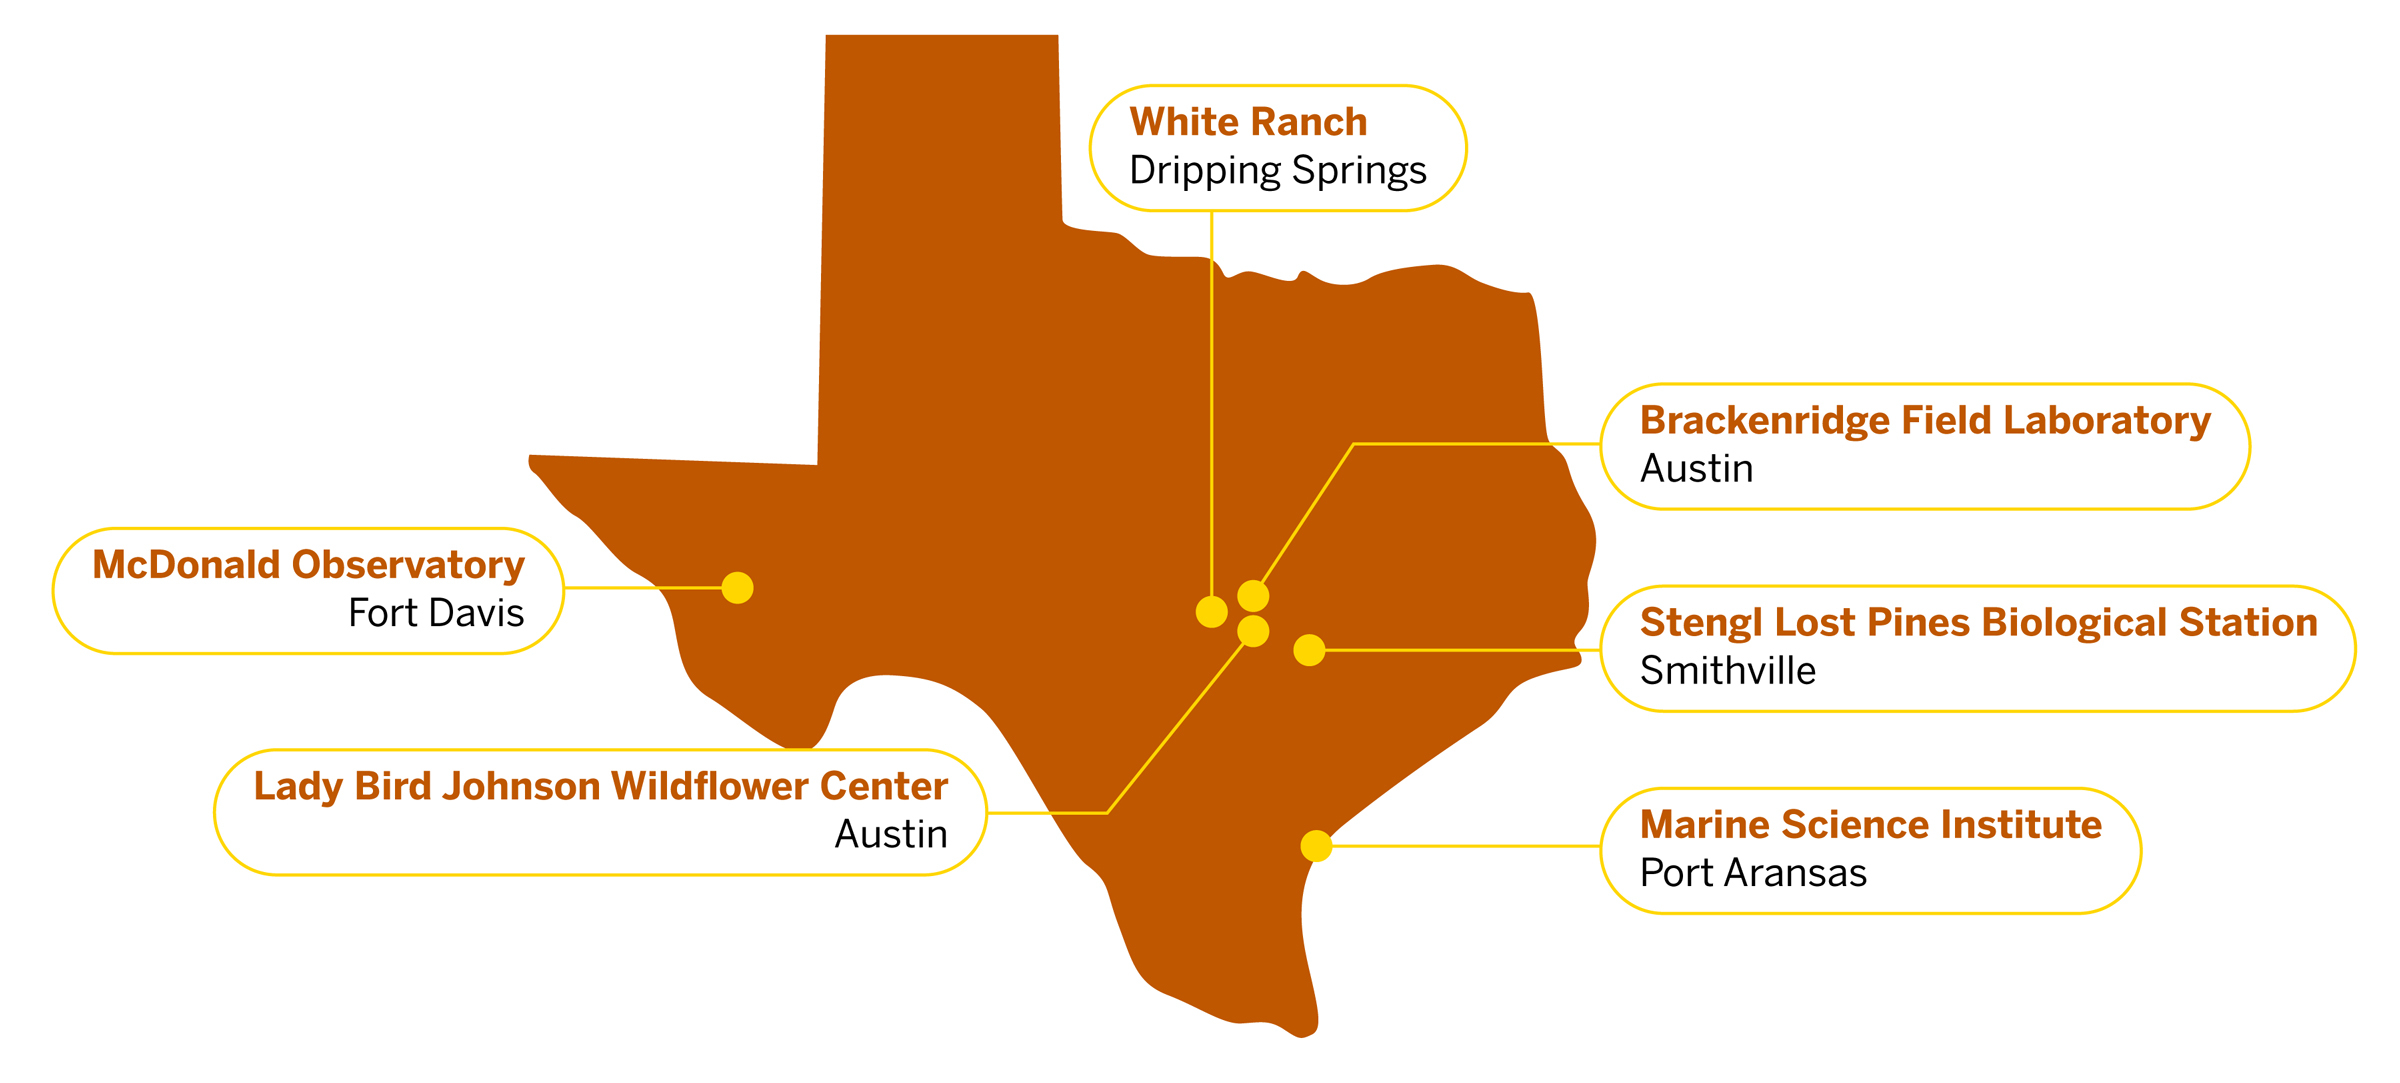 A map of Texas Field Station Network sites shows the state in burnt orange with four central locations labeled (White Ranch, Dripping Springs, Brackenridge Field Laboratory, Austin, Stengl Lost Pines BIological Station, Smithville, Lady Bird Johnson Wildflower Center, Austin), one on the coast (Marine Science Institute, Port Aransas) and one in West Texas (McDonald Observatory, Fort Davis)